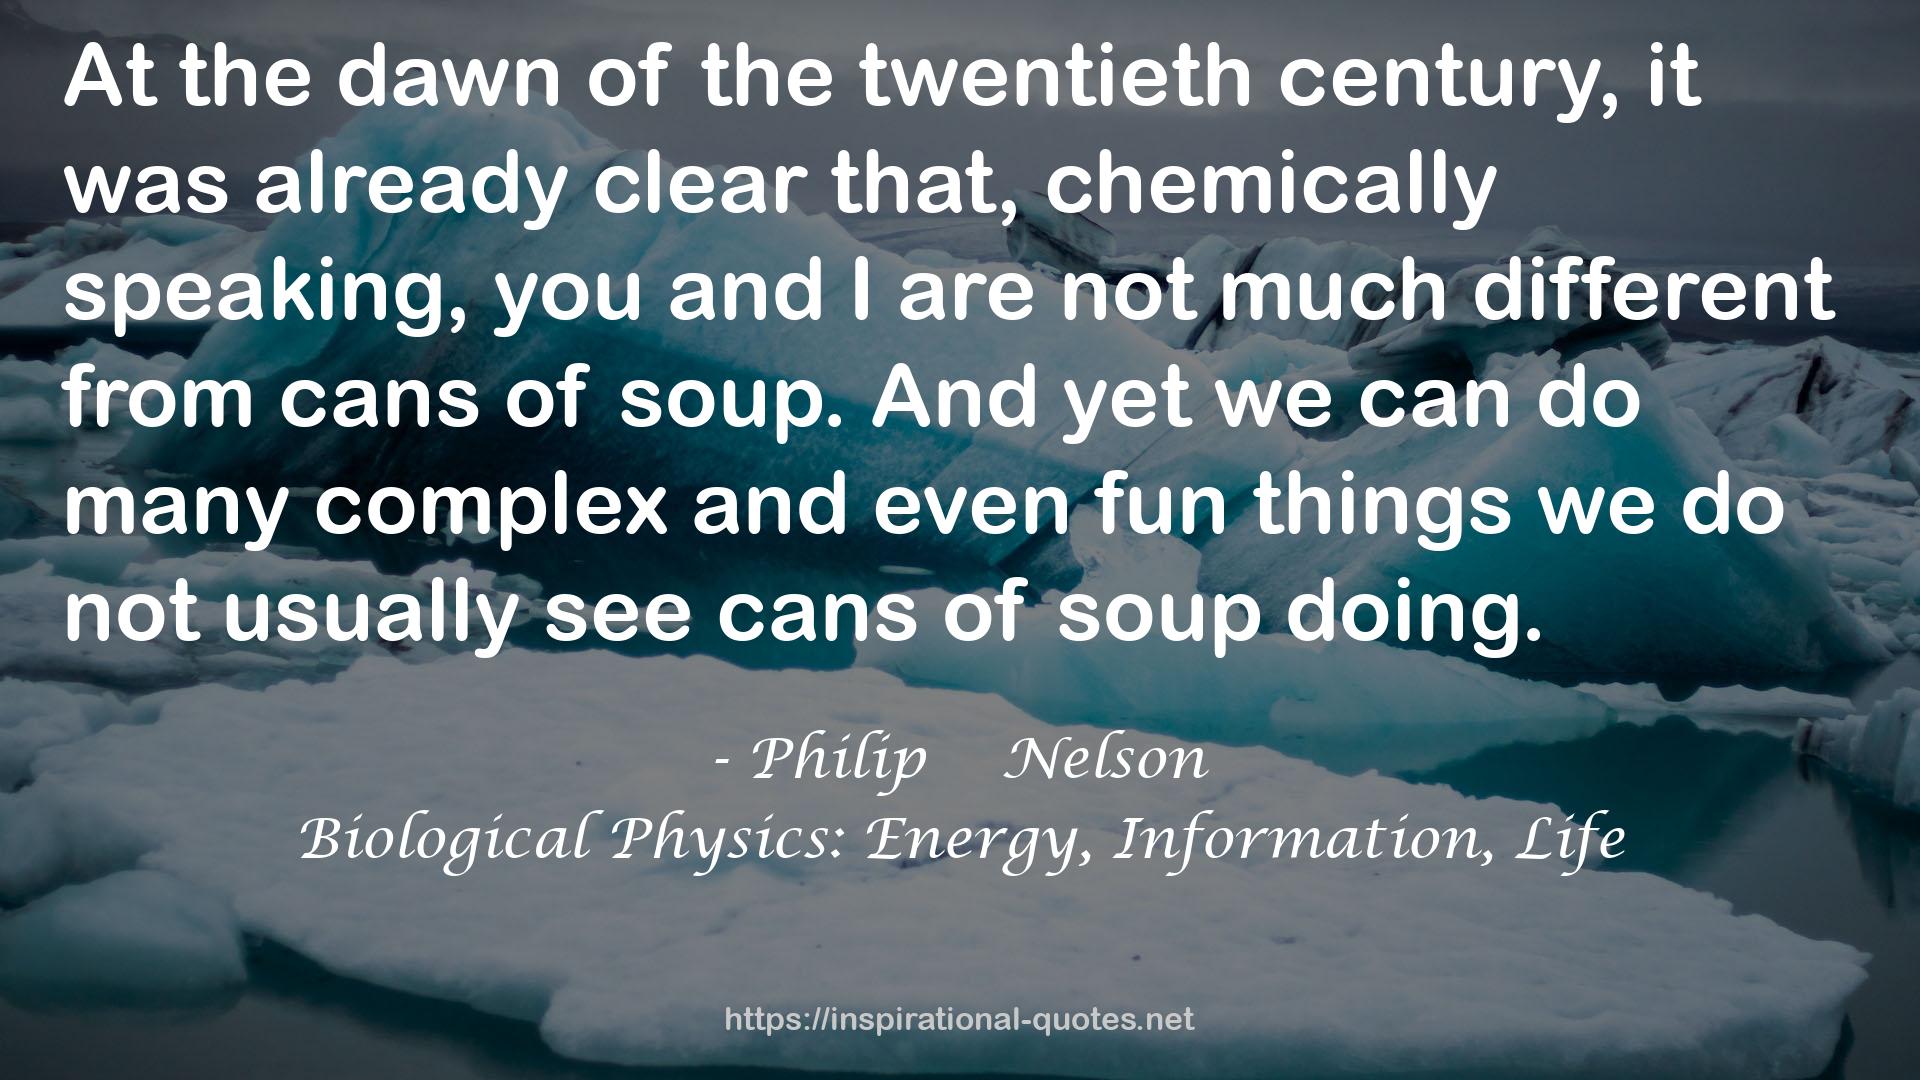 Biological Physics: Energy, Information, Life QUOTES